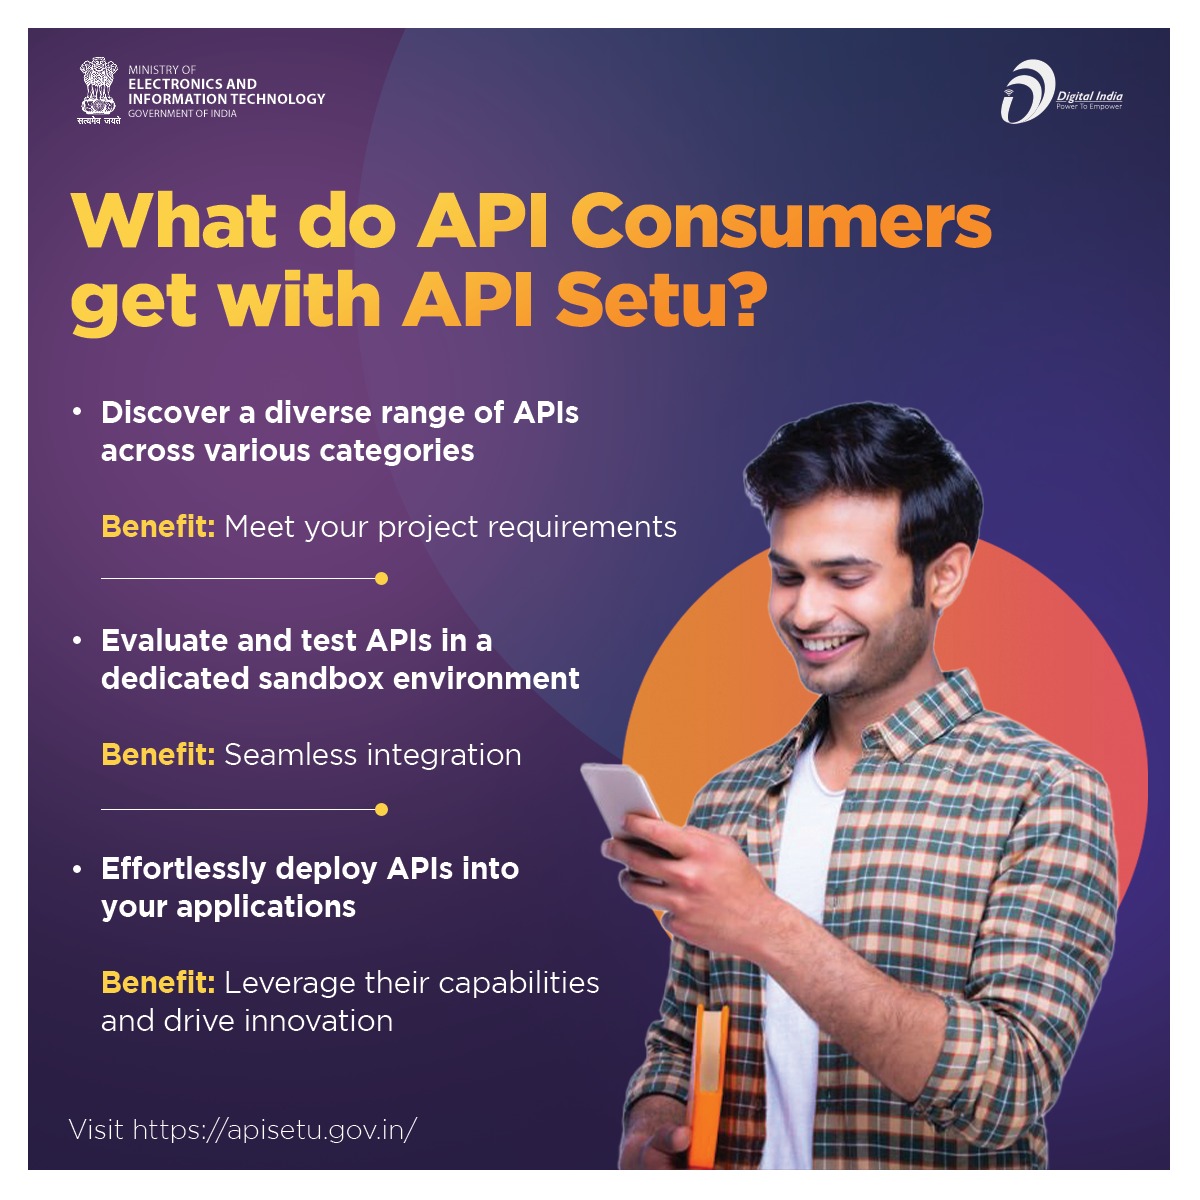 Did you know that @GoI_MeitY provides a diverse range of #APIs for almost all kinds of government work? Visit apisetu.gov.in #DigitalIndia #APISetu